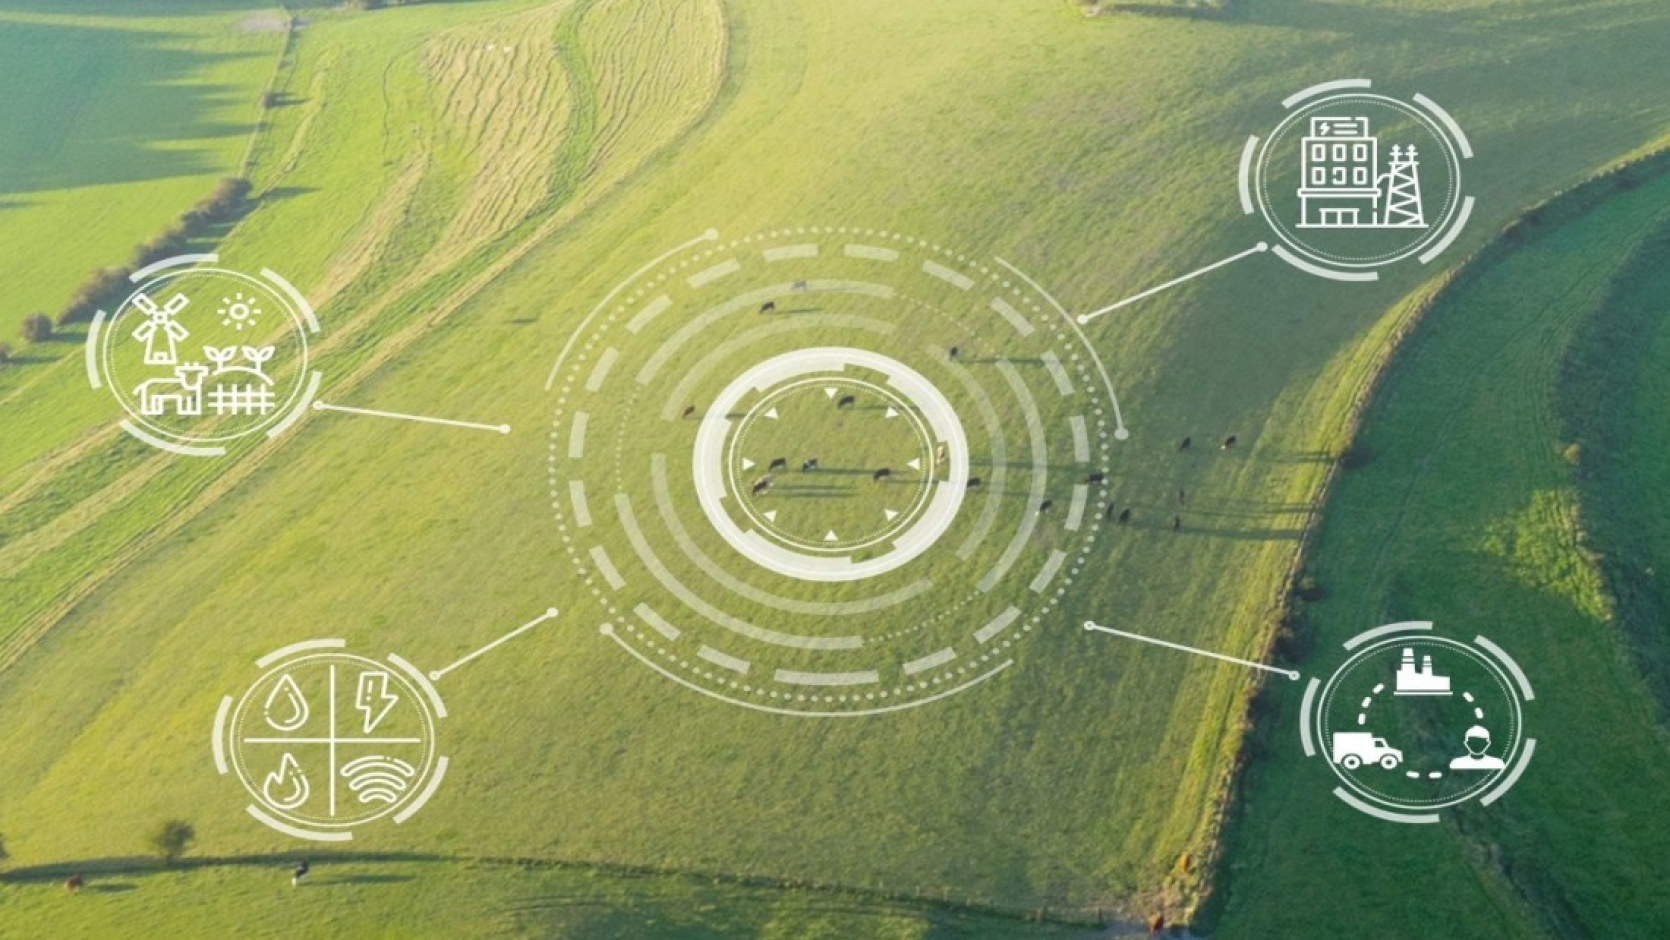 HOW DIGITAL SOLUTIONS CAN HELP SOLVE GLOBAL FOOD PROBLEMS